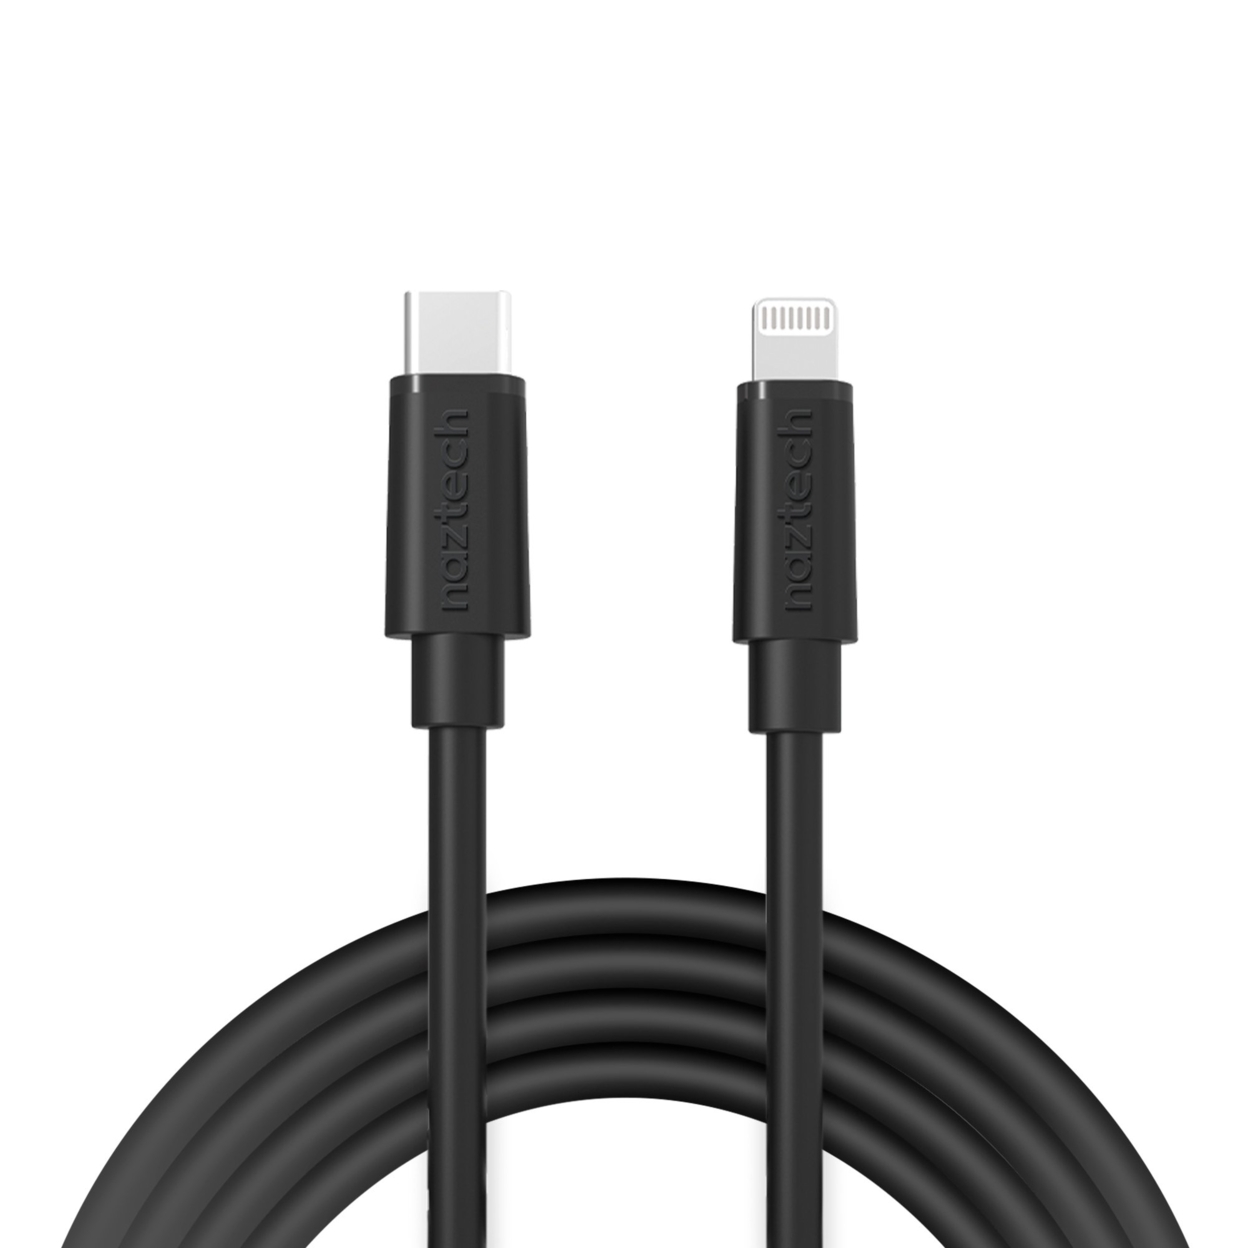 Naztech Fast Charge USB-C To MFi Lightning Cable 12ft (12FT-PRNT) - White